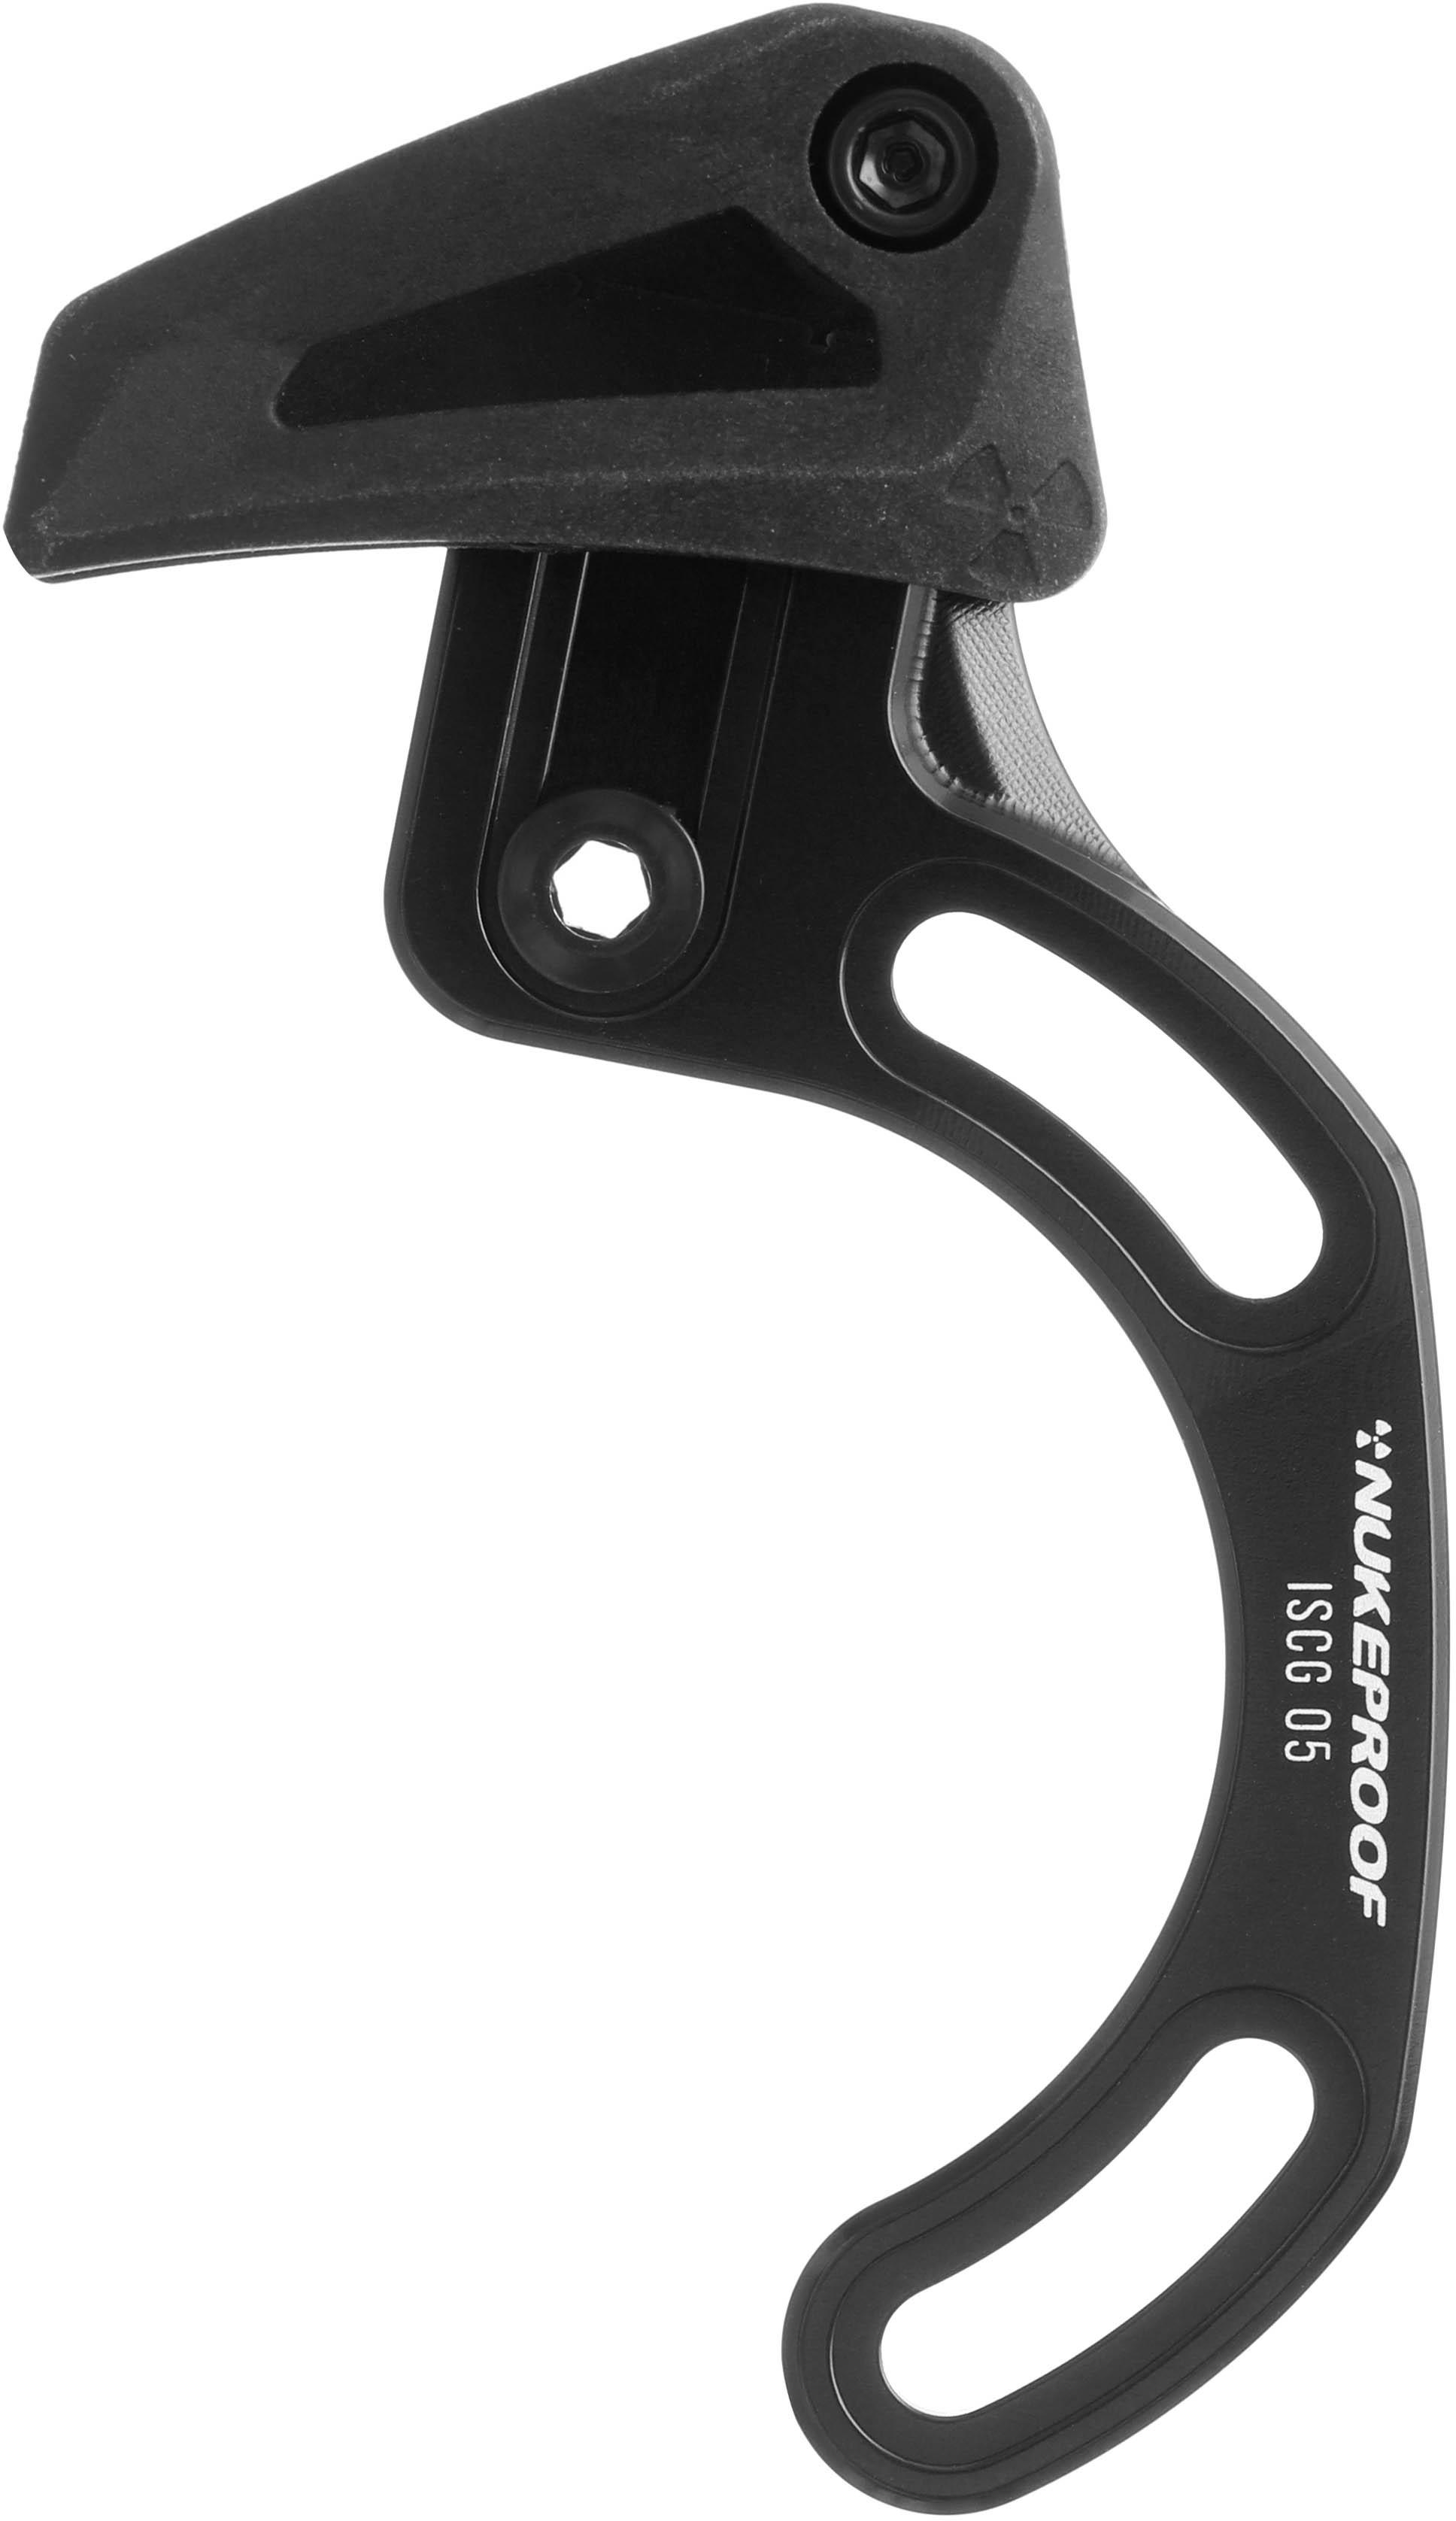 Nukeproof Chain Guide Iscg 05 Top Guide - Black/black